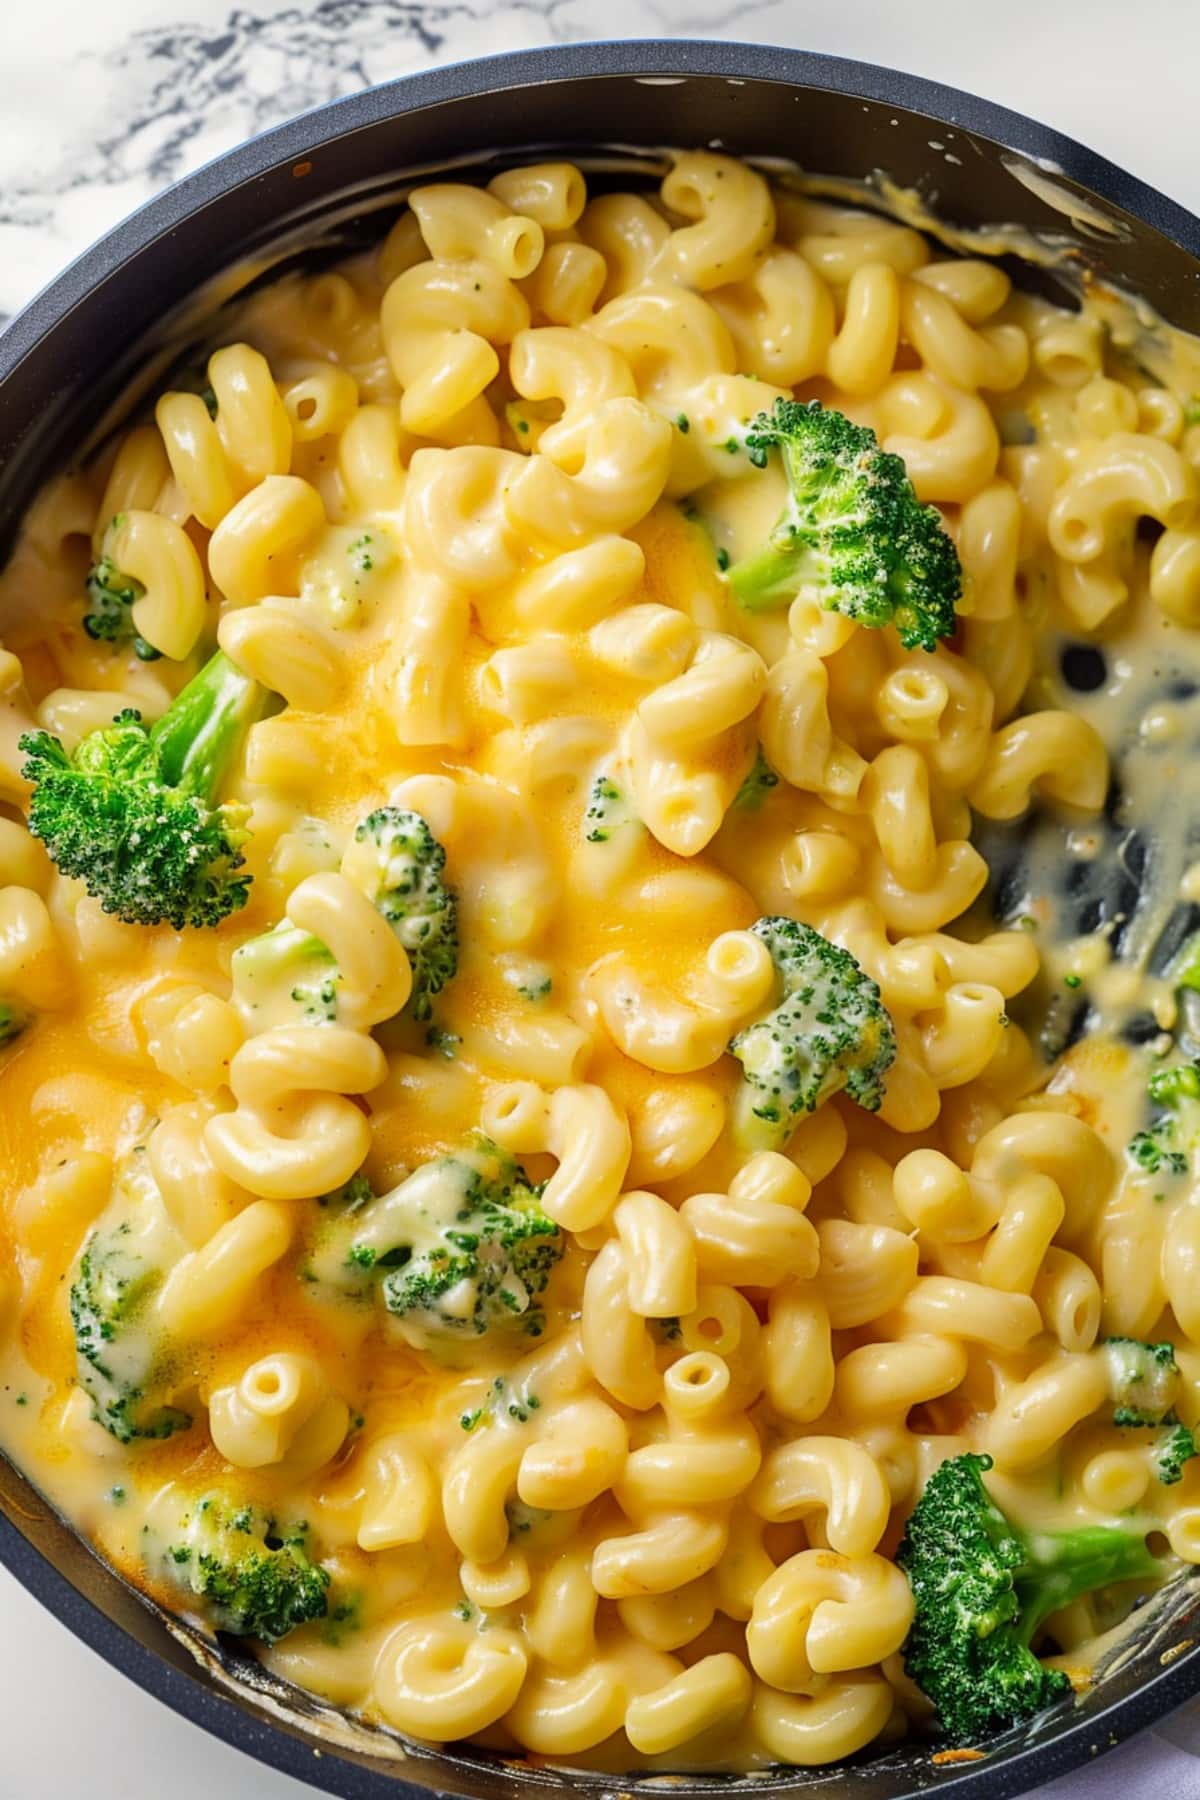 Cheesy and hearty homemade broccoli cheddar mac and cheese in a skillet, overhead view